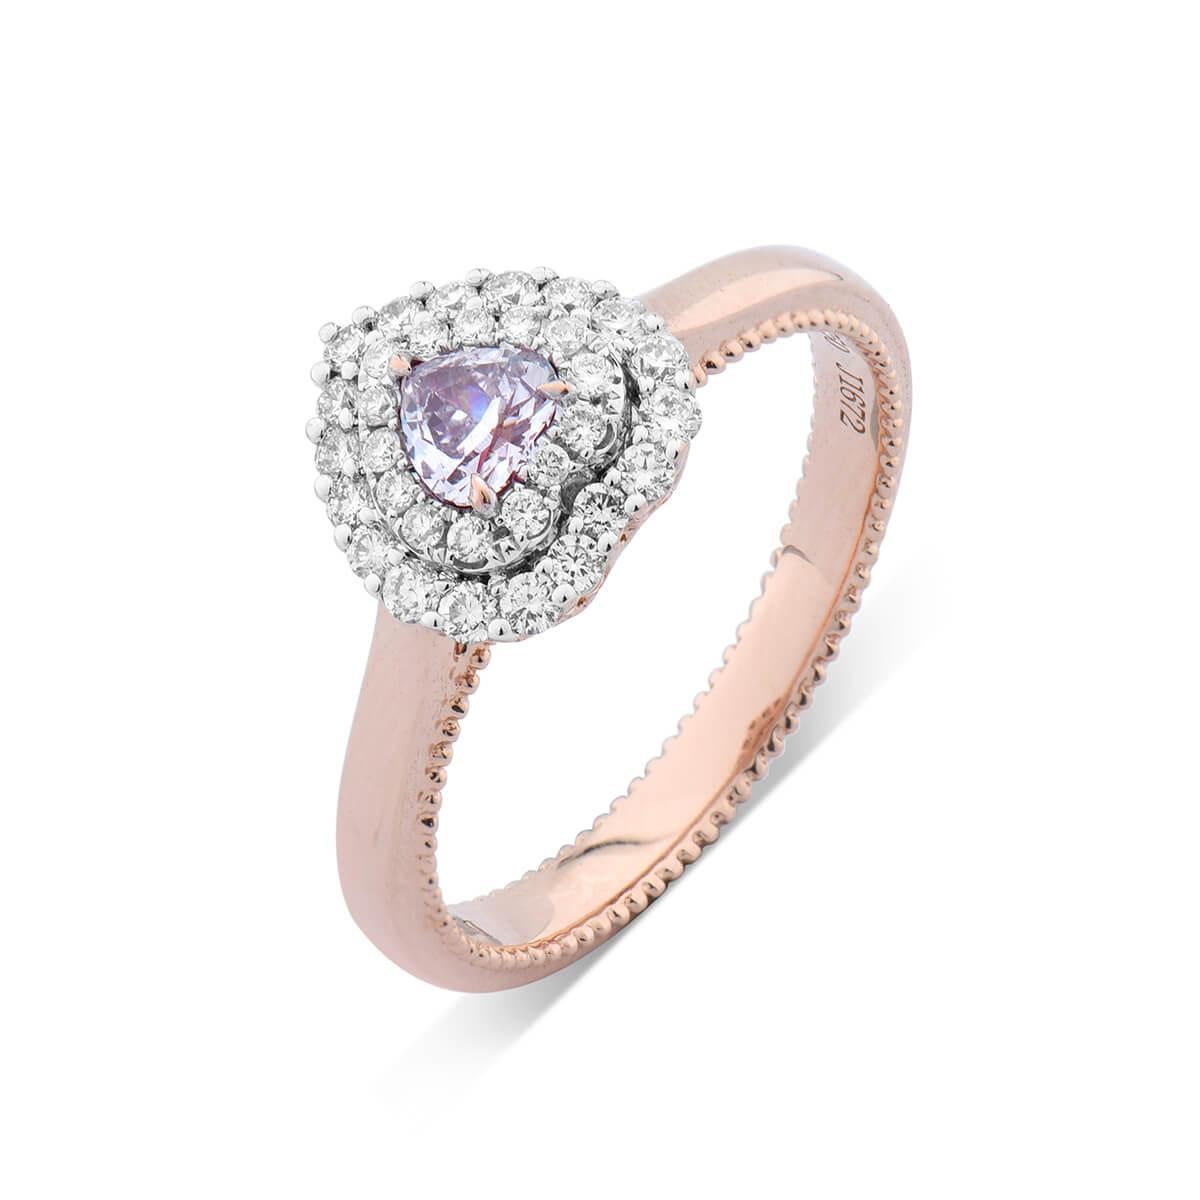 This beautiful piece consists of a 0.20 Carat Natural Light Pink Heart Shaped Diamond surrounded by smaller natural white diamonds making up a total of 0.47 Carats. 
This piece is GIA certified and has been expertly crafted using 18 Karat Rose Gold.